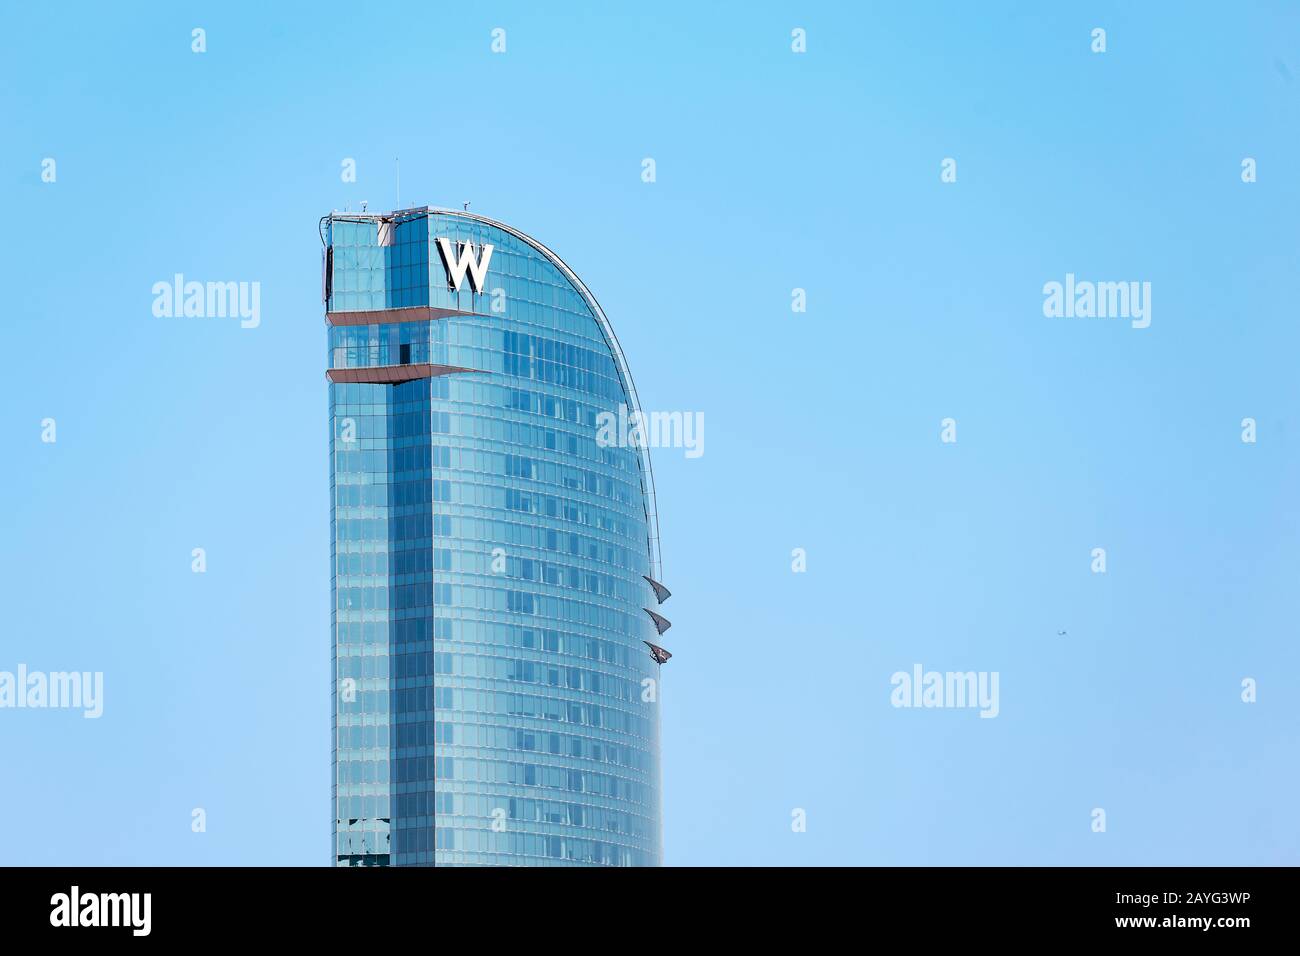 29 JULY 2018, BARCELONA, SPAIN: Famous sail shaped Hotel W skyscrapper Stock Photo